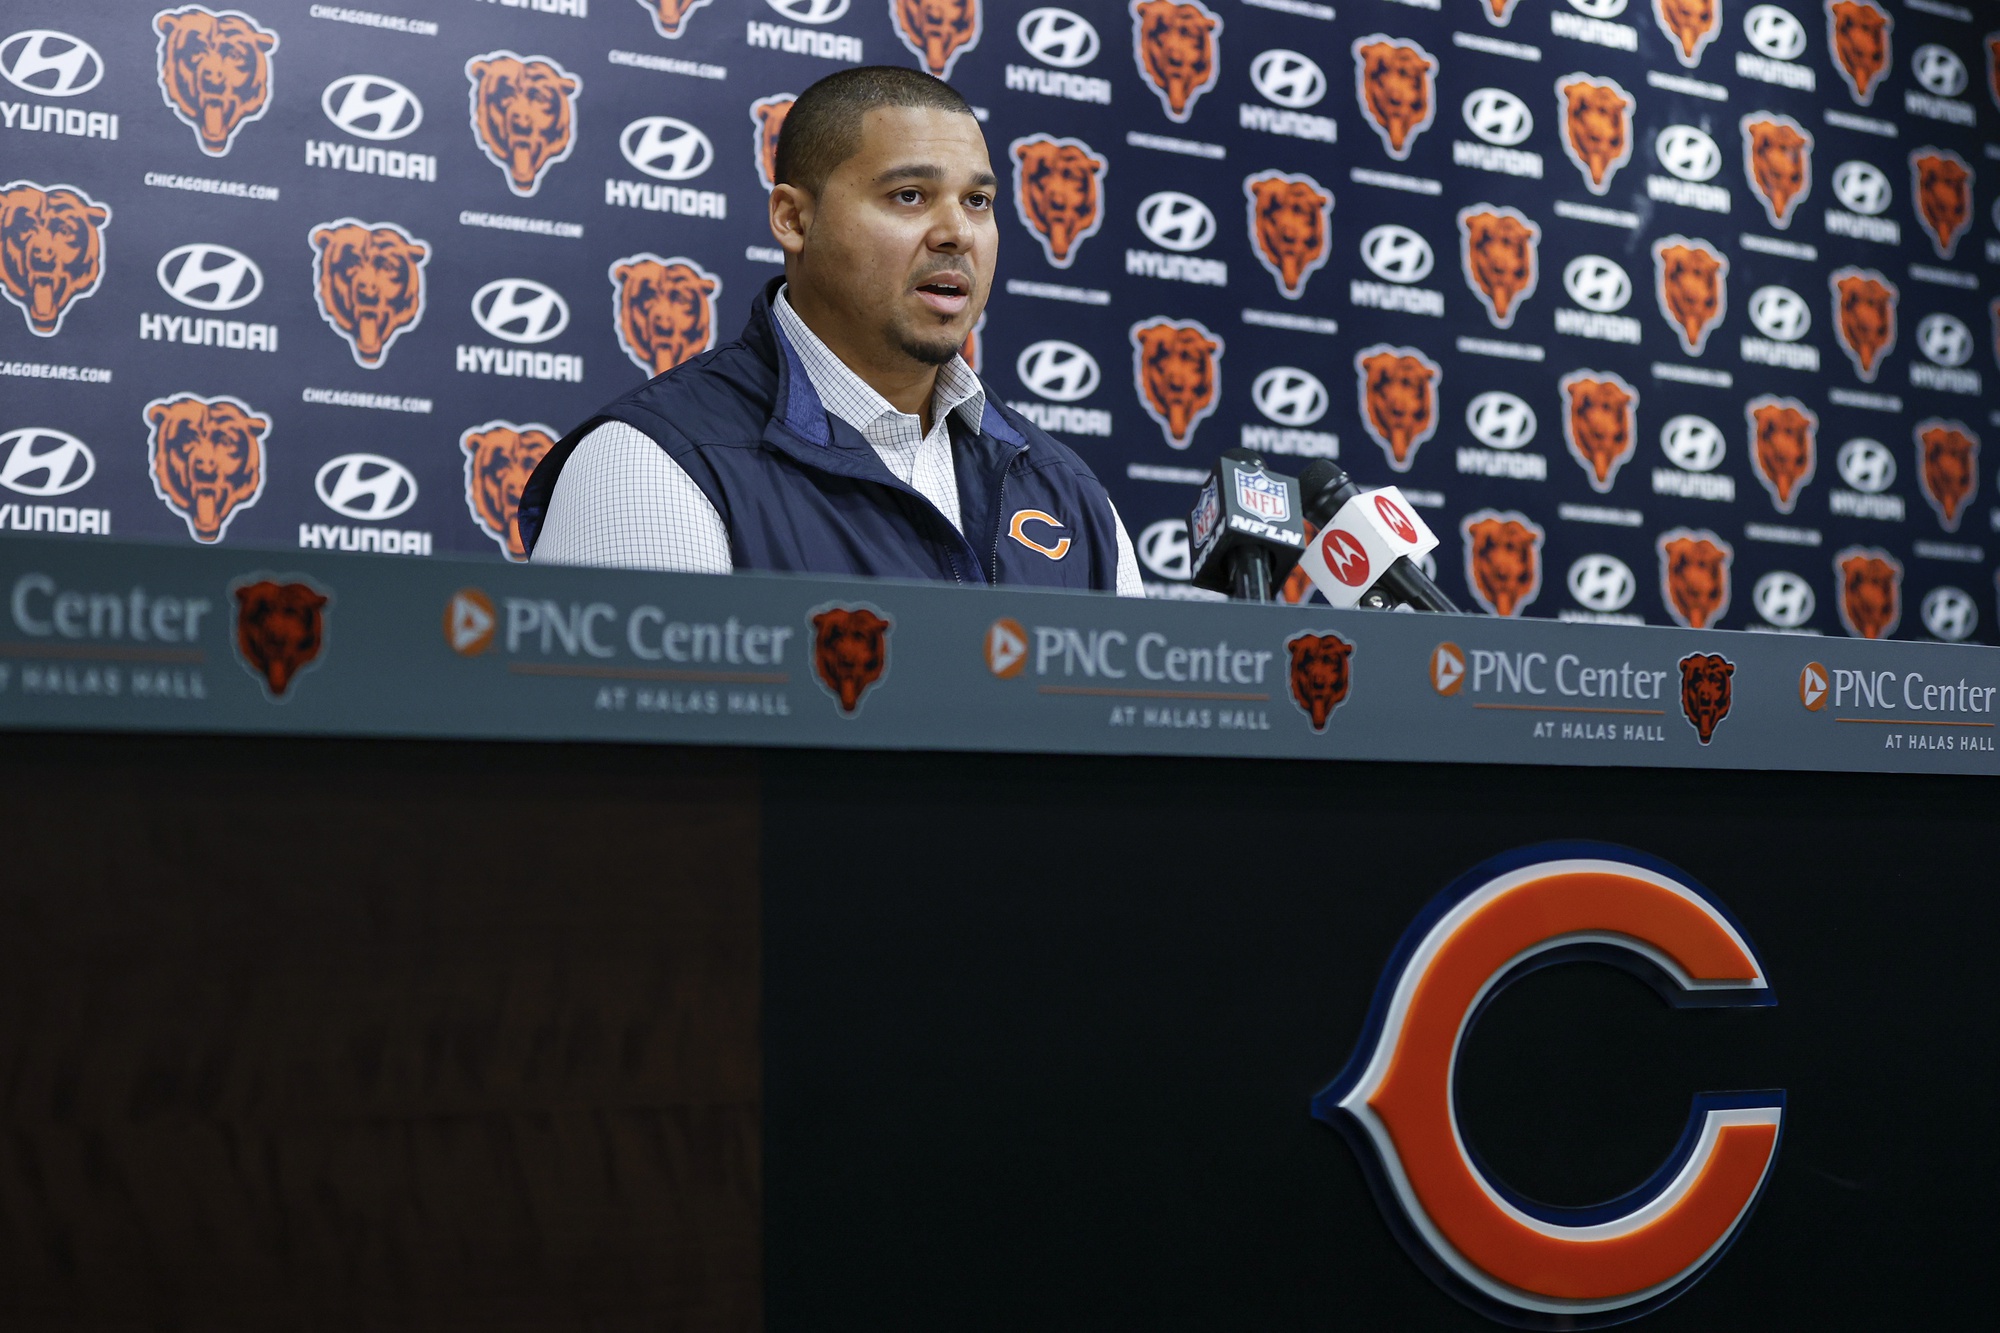 10 Things We Learned From The Bears' Press Conference Today